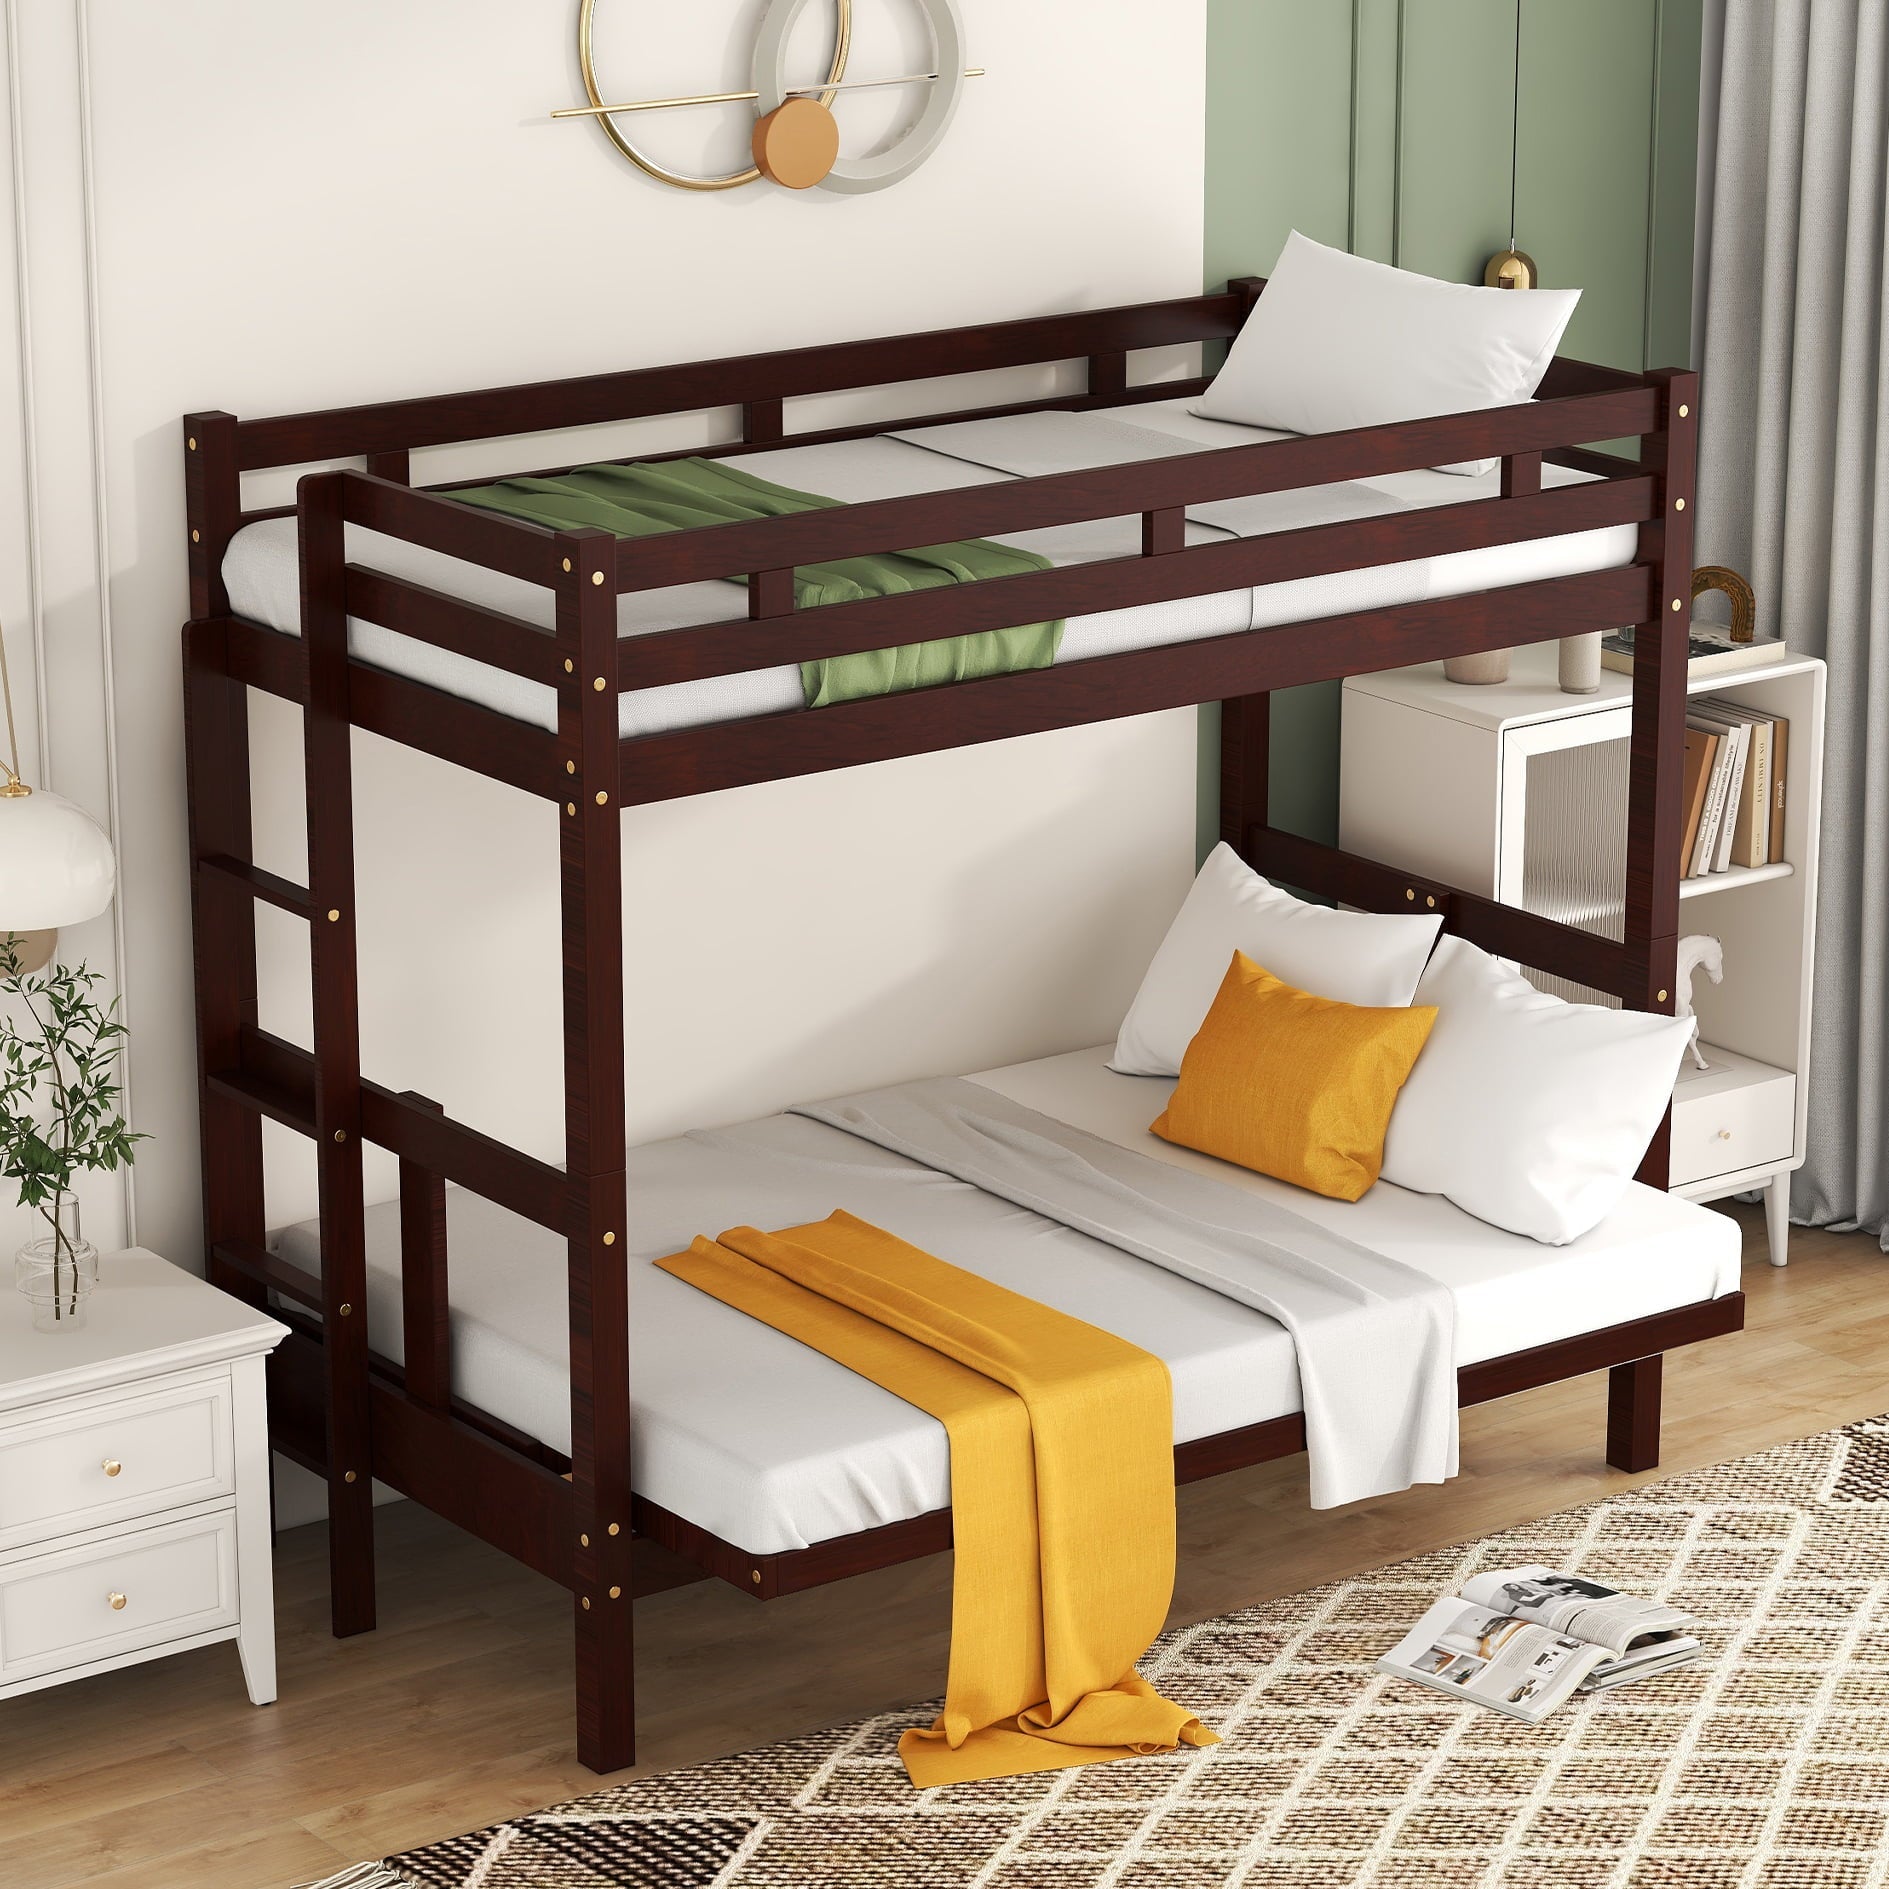 Bellemave Twin Over Full/Futon Bunk Beds, Wood Bunk Bed Frame can be Converted into Couch, 2 in 1 Detachable Bunk Bed for Kids Teens Adults (Espresso)